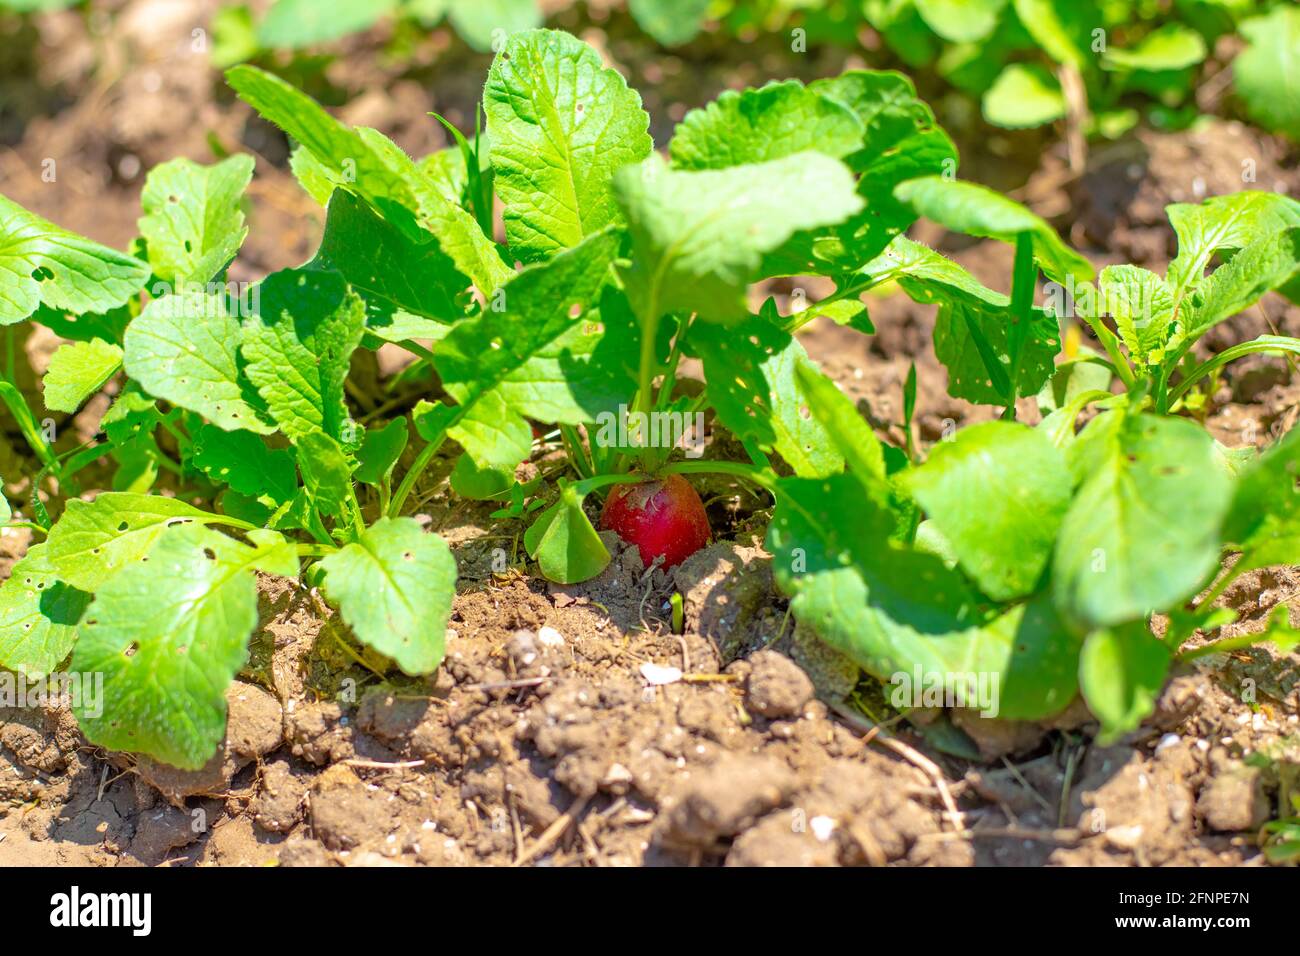 Young red radish grows in the garden bed. Growing tasty healthy root vegetables. Stock Photo